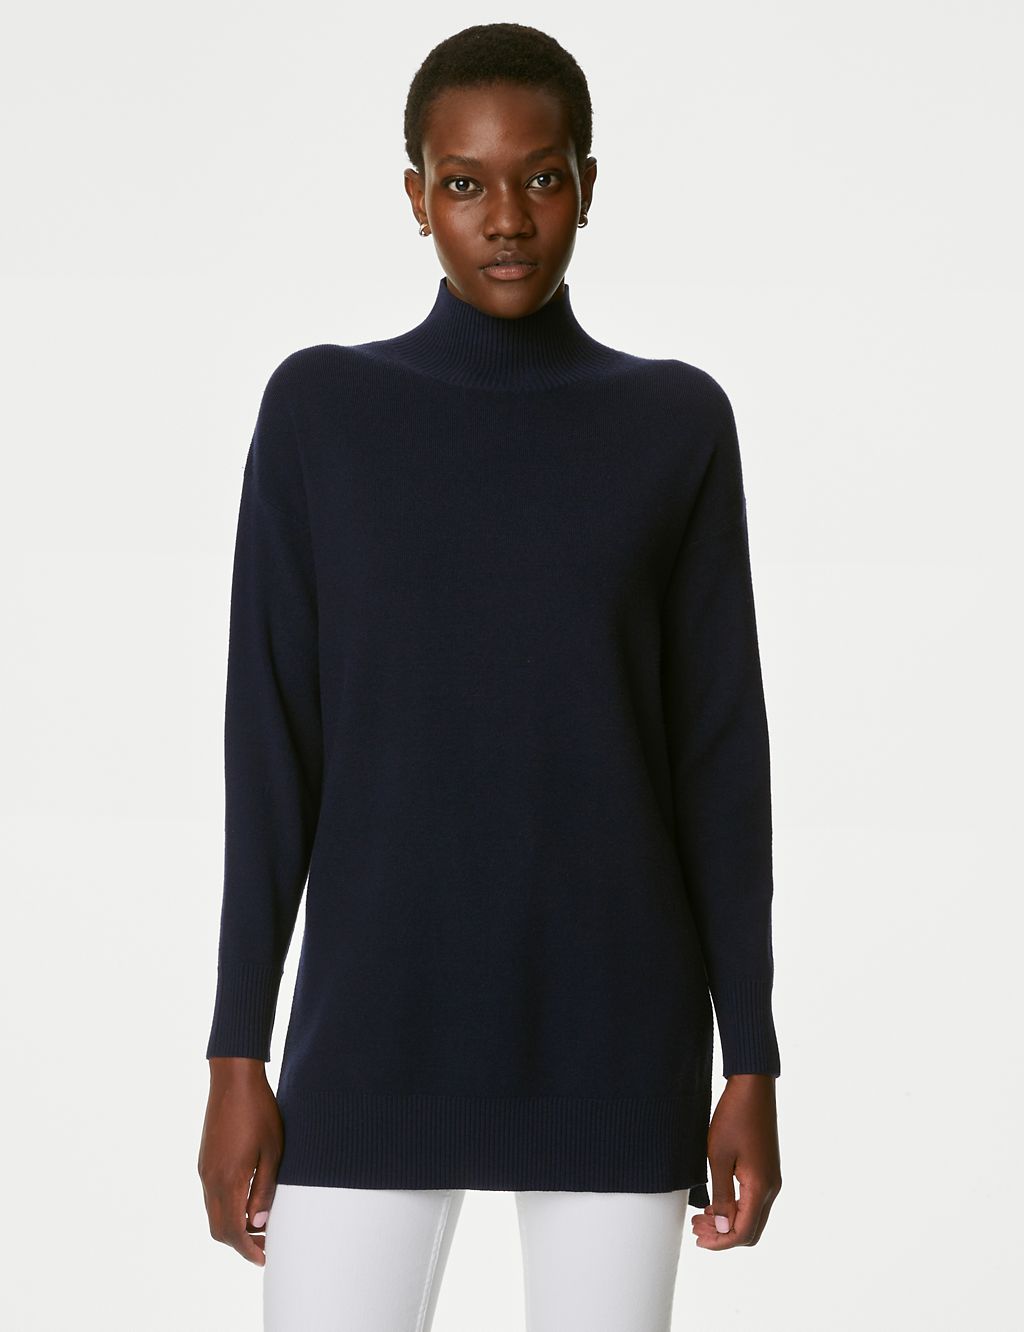 Soft Touch Funnel Neck Longline Jumper | M&S Collection | M&S